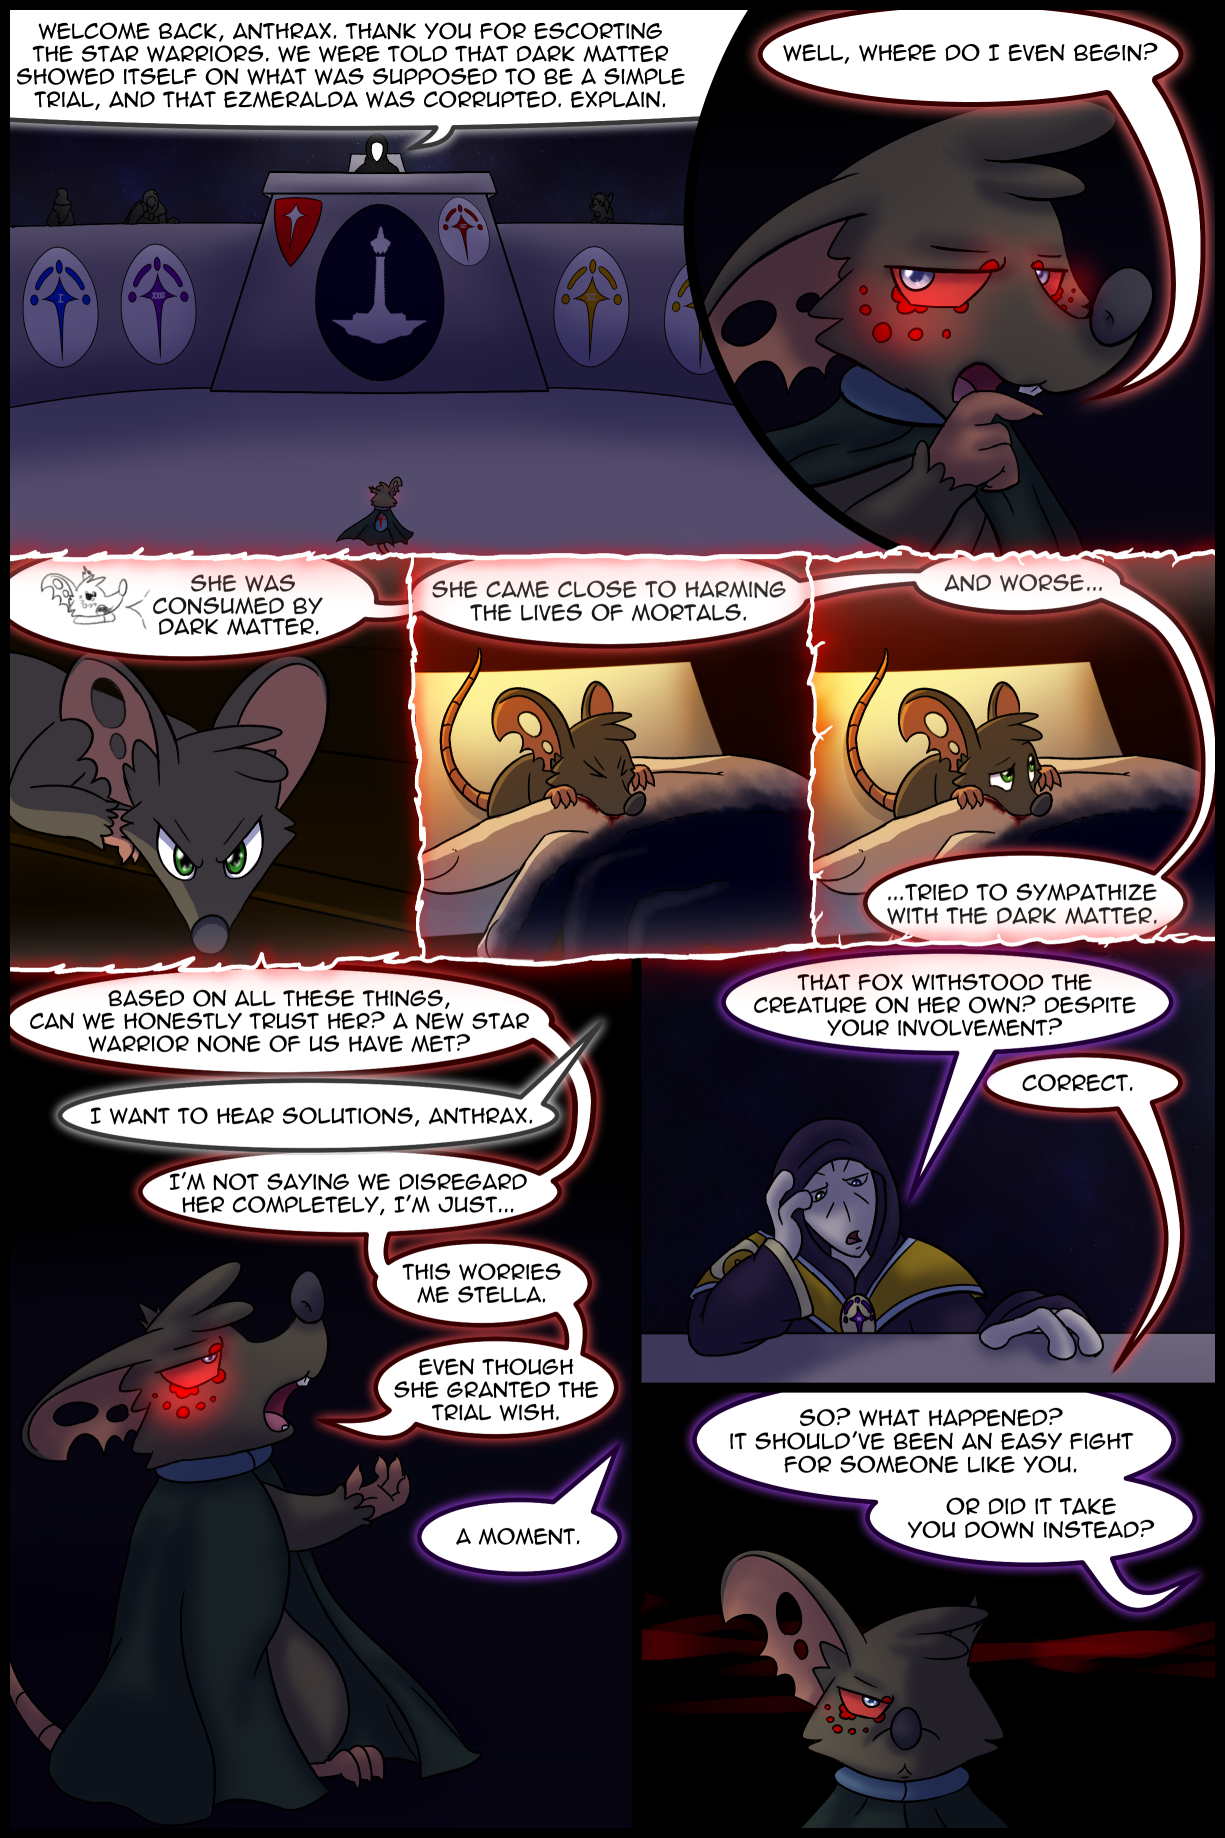 Ch4 Page 9 – The Council